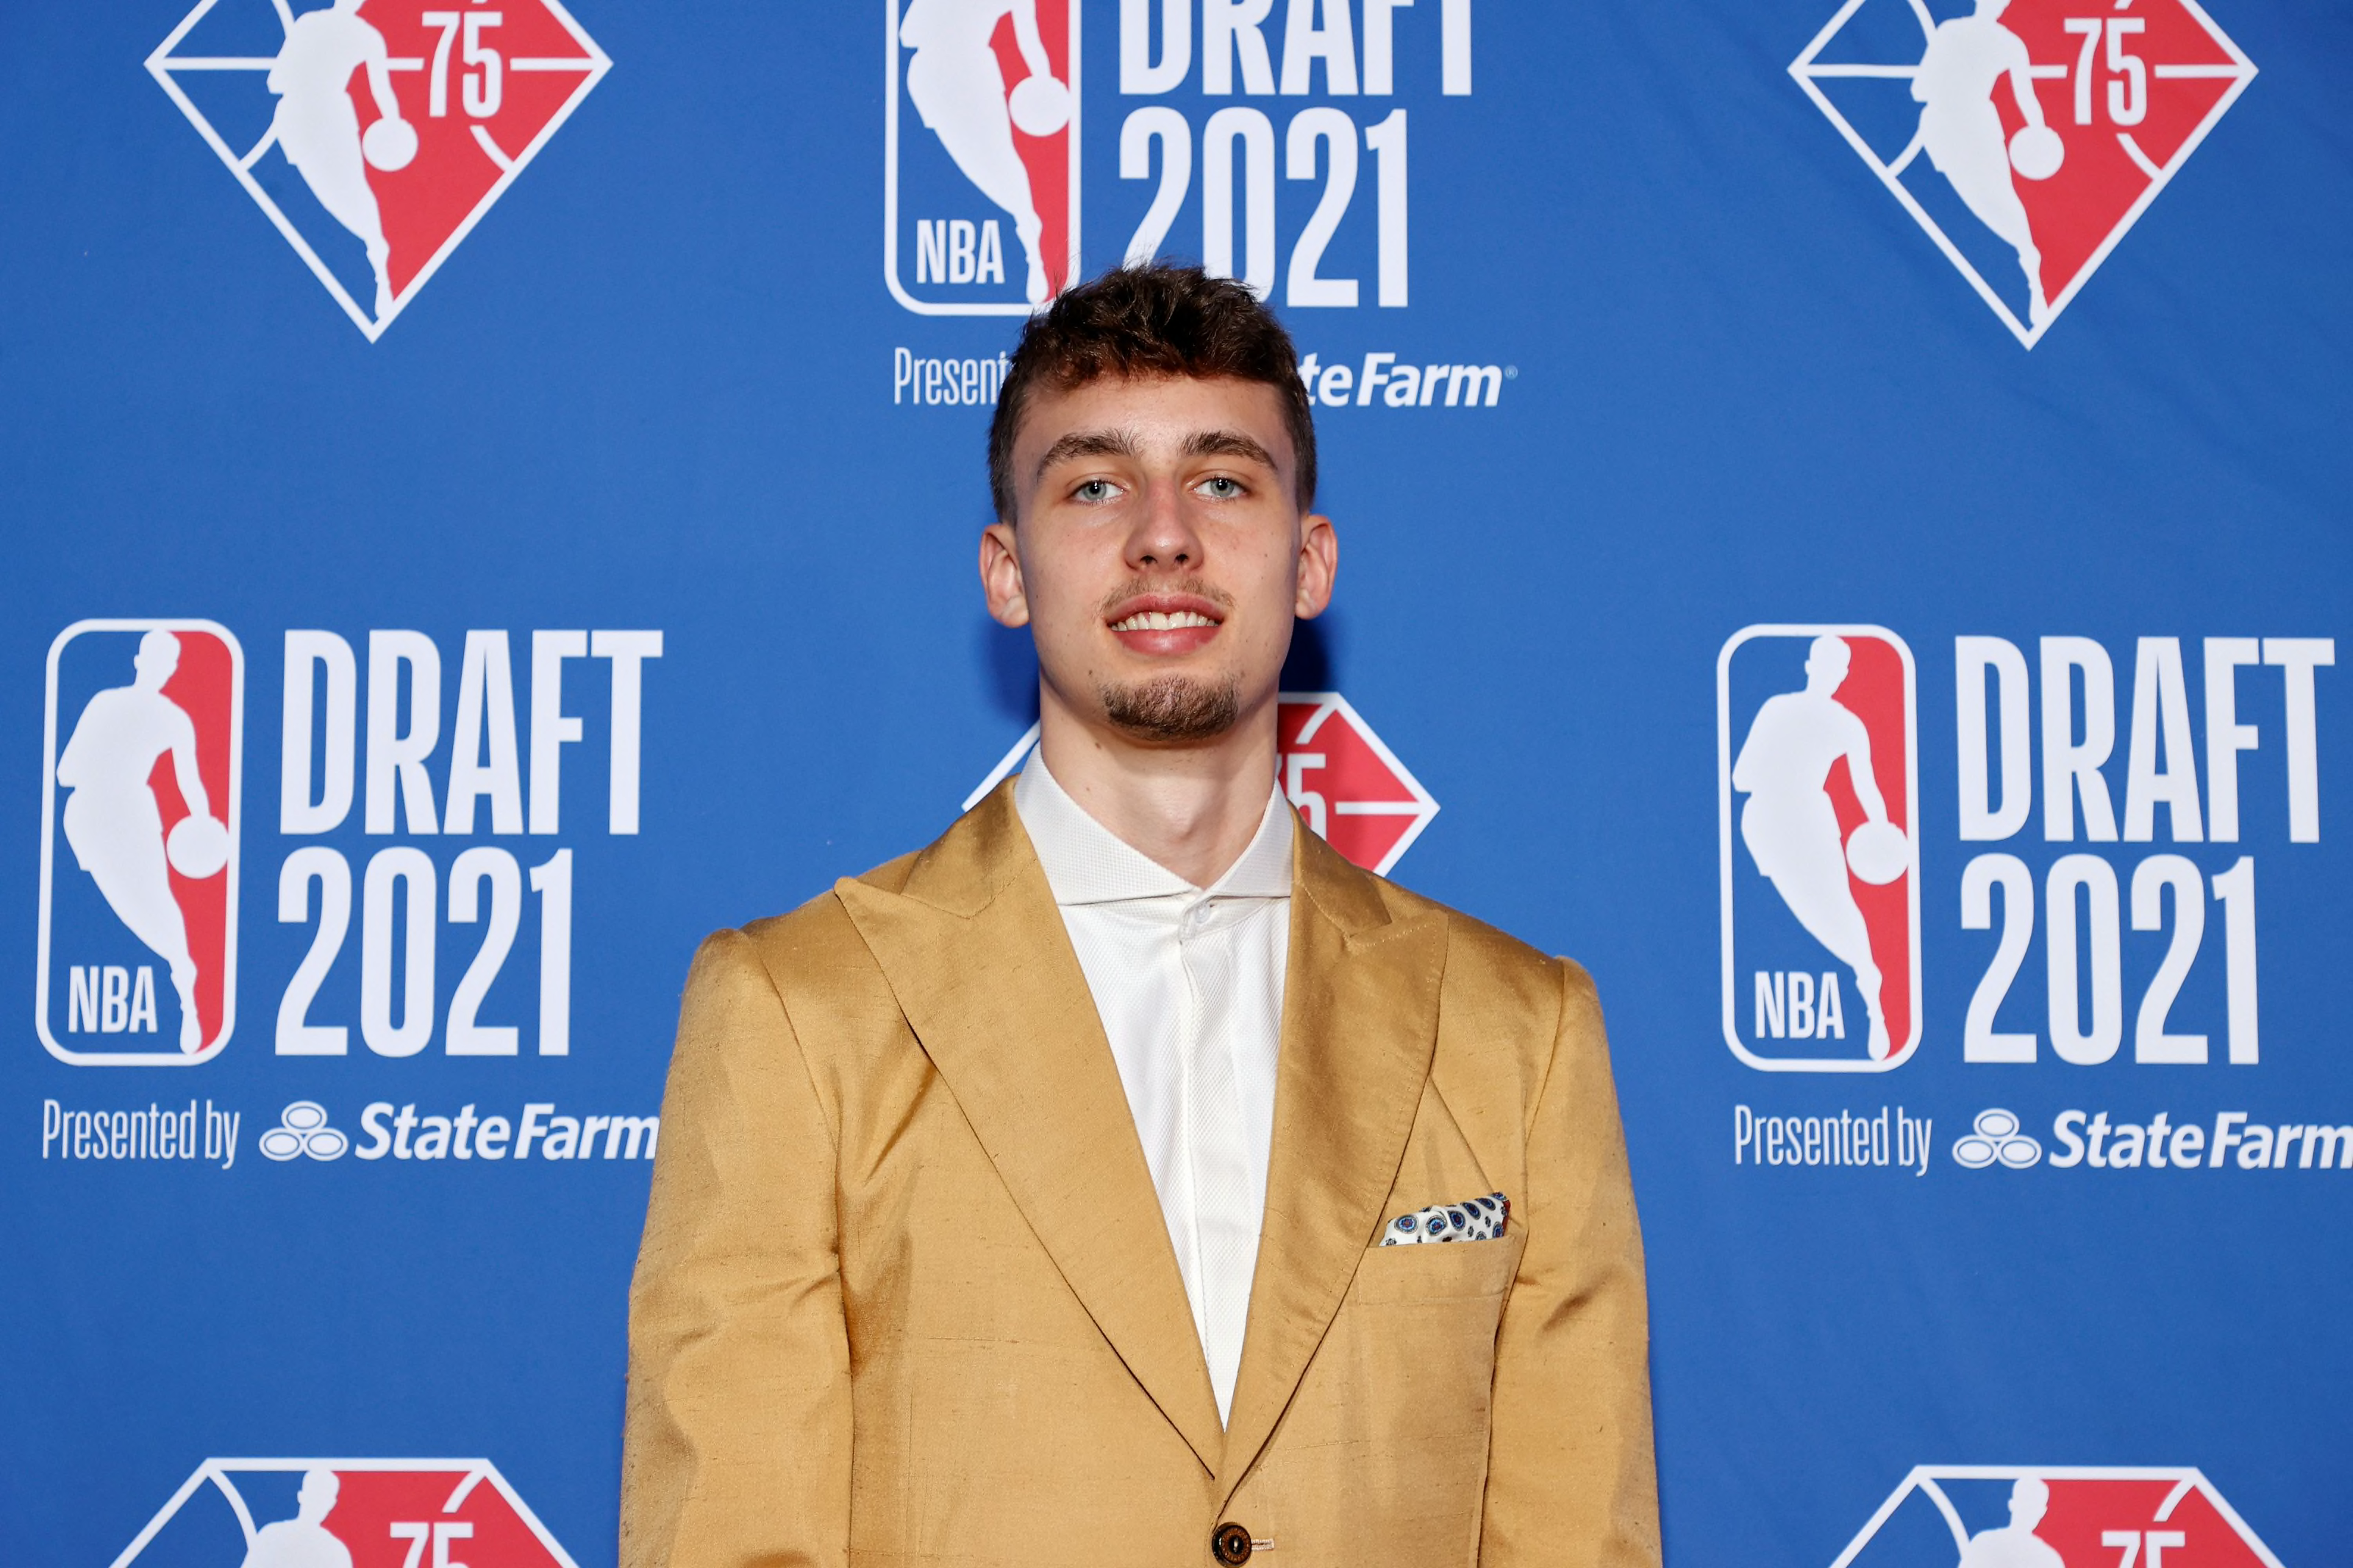 NBA Draft 2021 presented by State Farm to take place on July 29